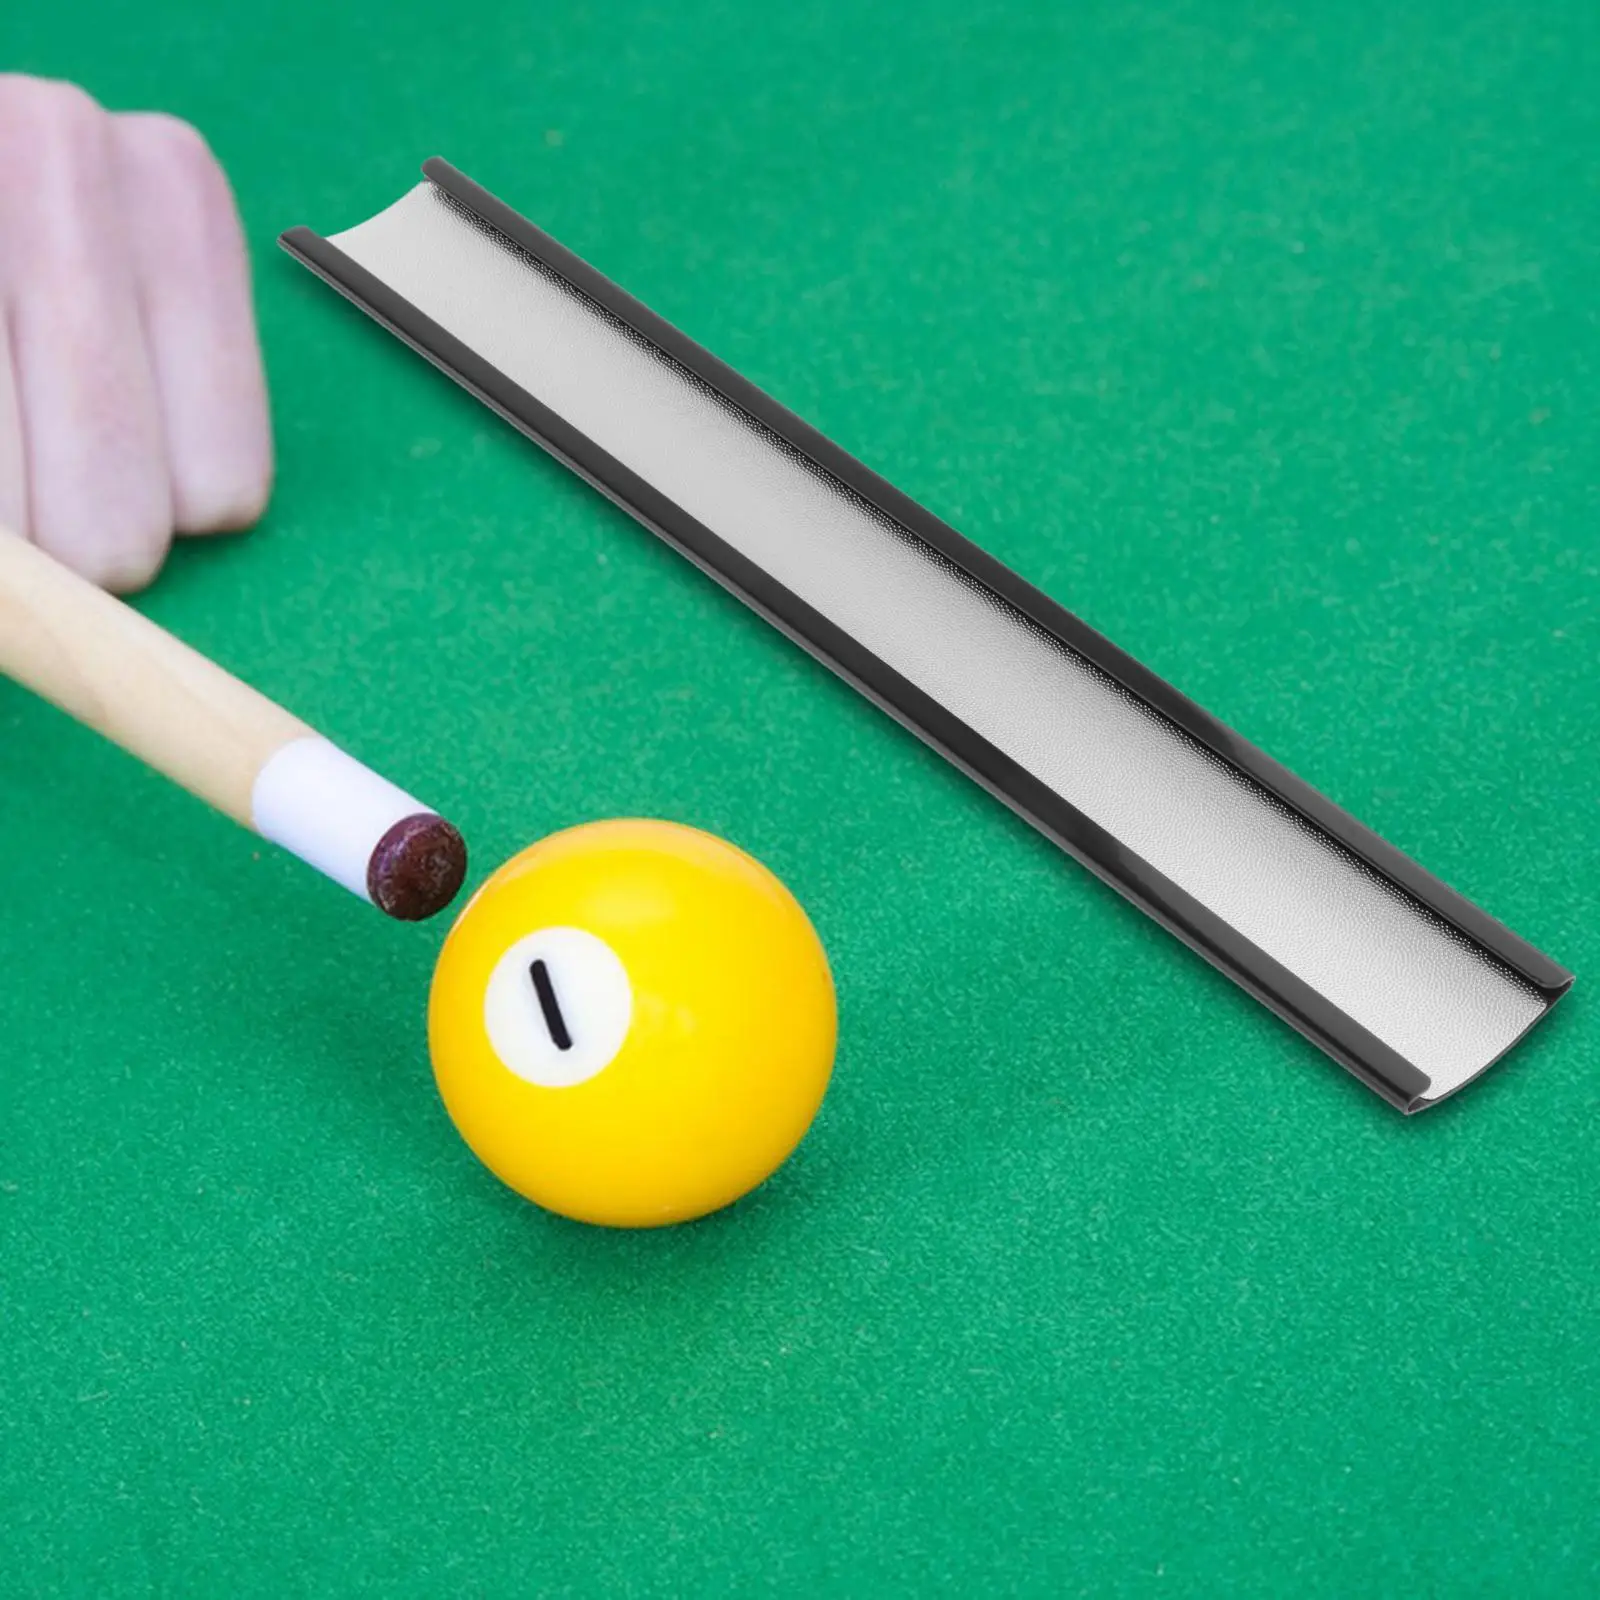 Portable Shaft Cleaning Easy to Carry Lightweight Metal Universal Durable Accessory for Polisher Shaper Billiards Snooker